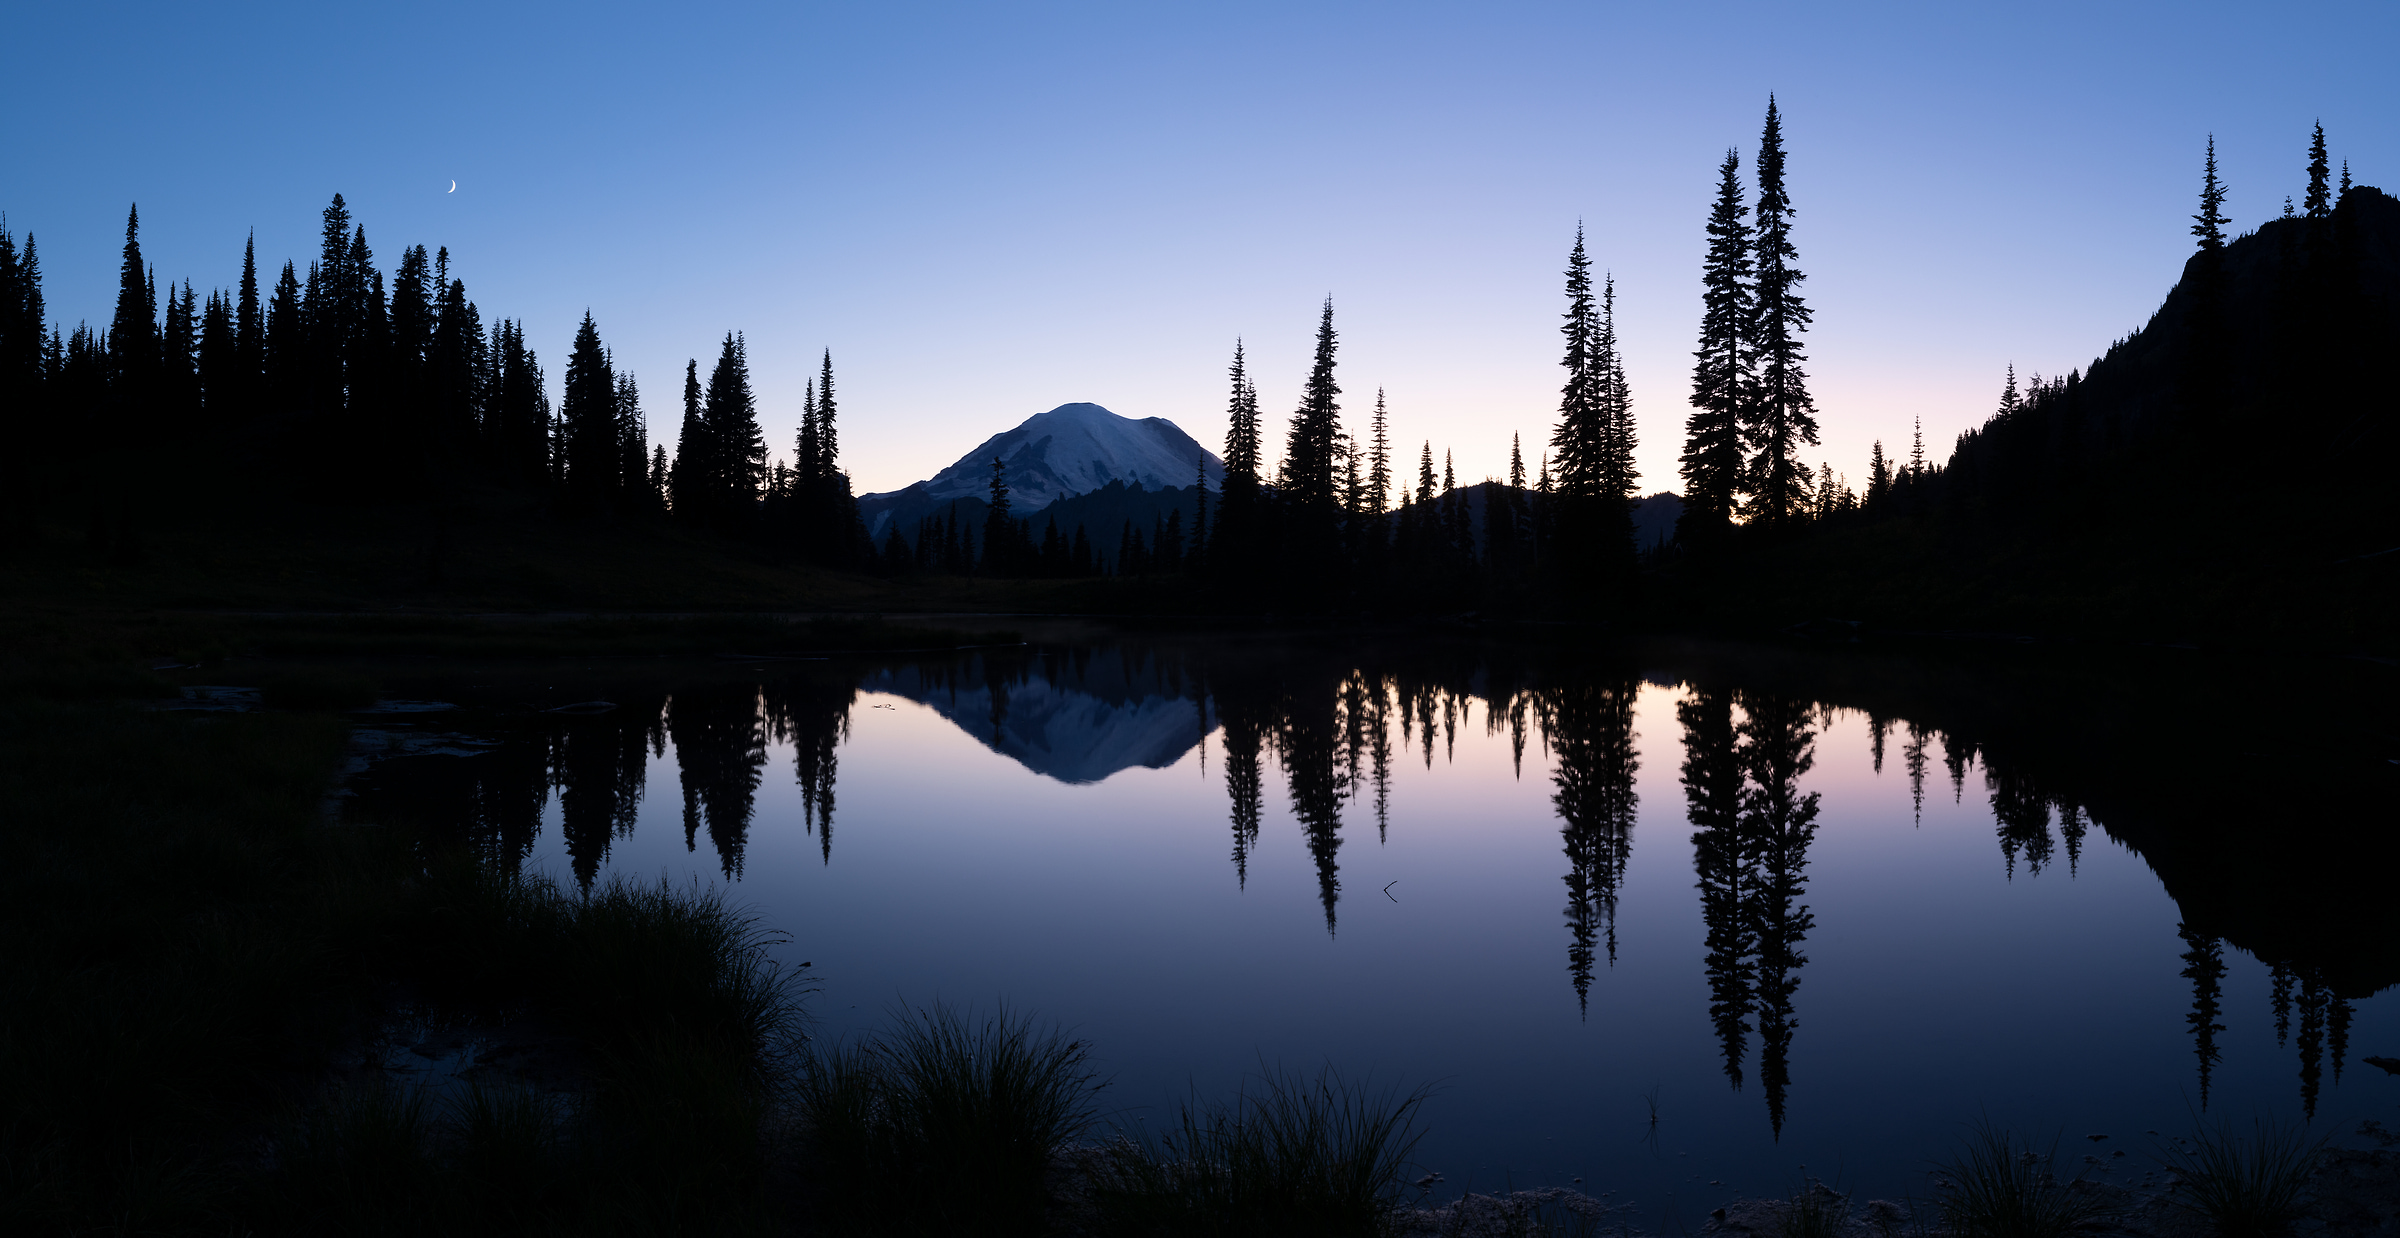 162 megapixels! A very high resolution, large-format VAST photo print of a lake at twilight with evergreen trees and Mt. Rainier being reflected; photograph created by Greg Probst in Mt. Rainier National Park, Washington